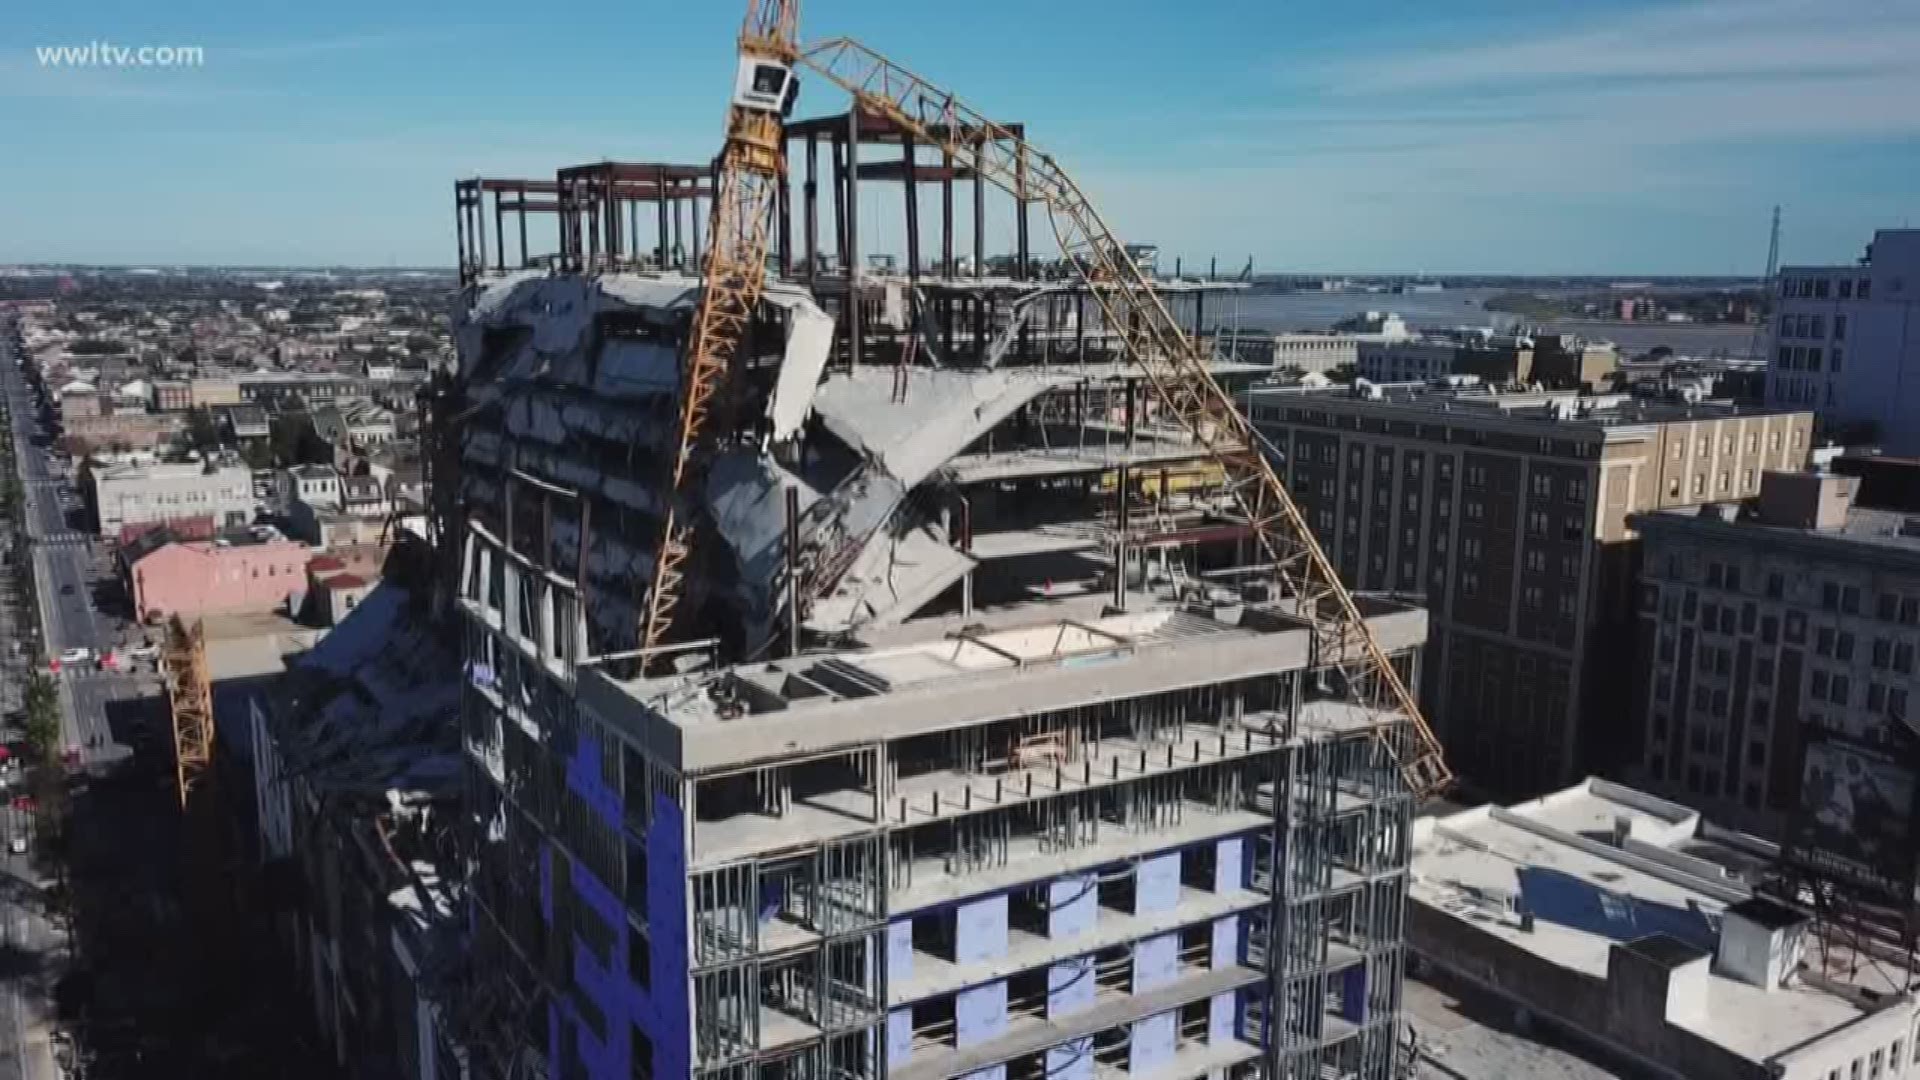 Two building inspectors the city says falsified their inspections at the ill-fated Hard Rock before it collapsed, were also no-shows for other inspections.